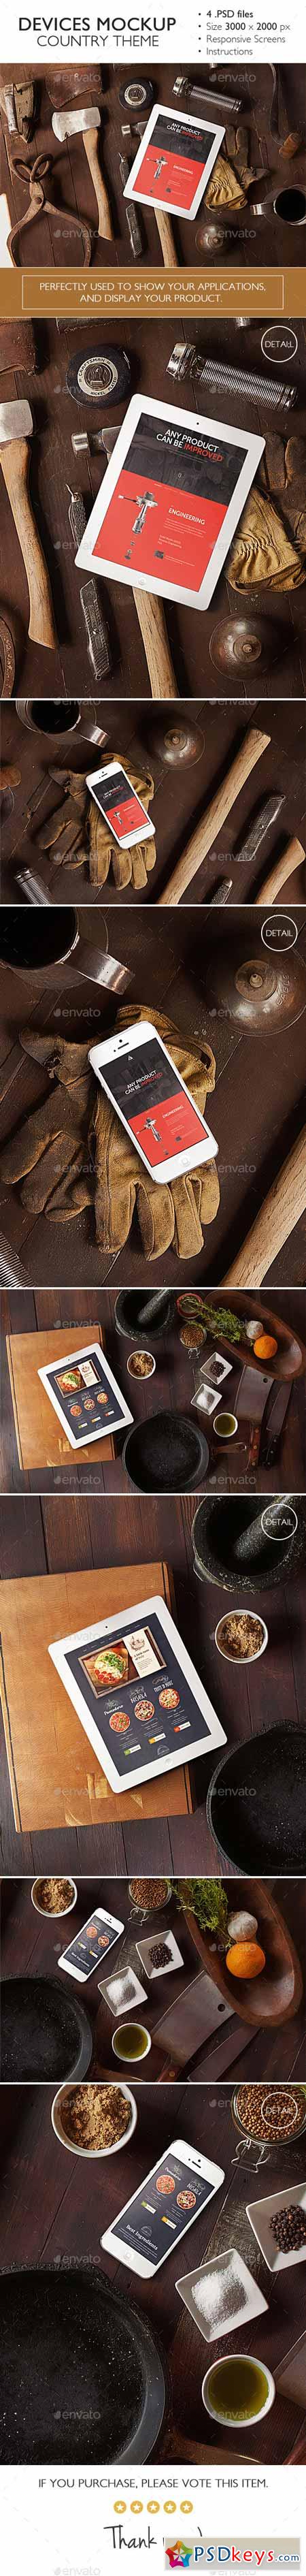 Devices Mockup Country Theme 12005644